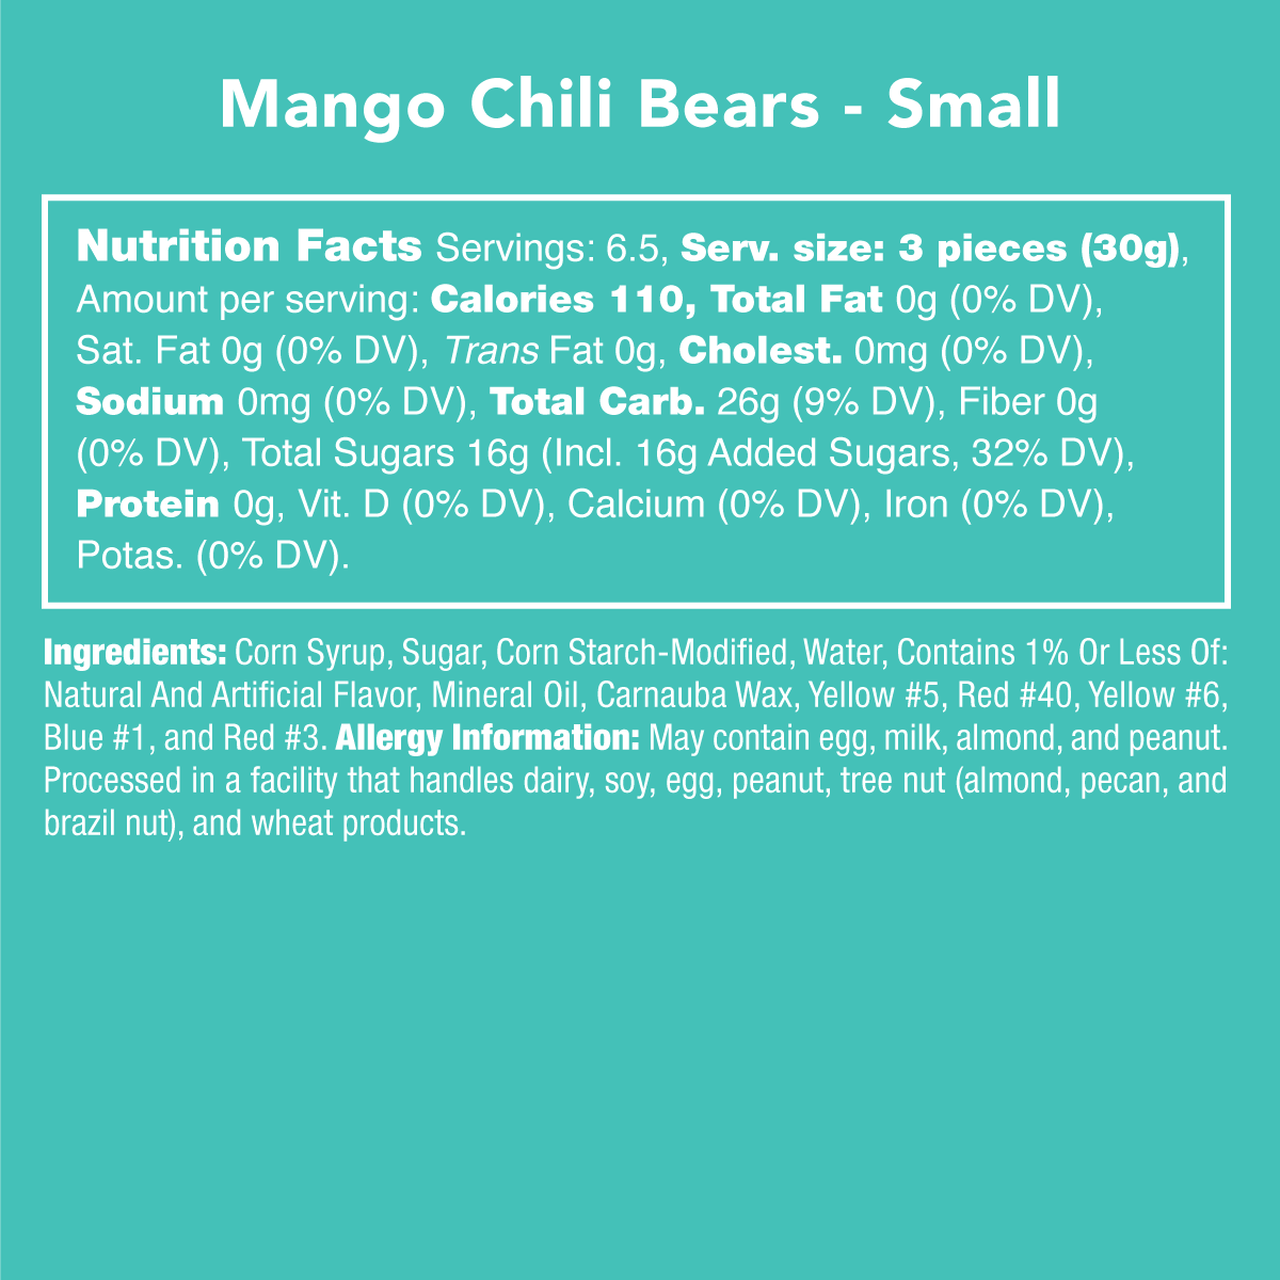 Mango Chili Bears Candy - Retail Swag candy